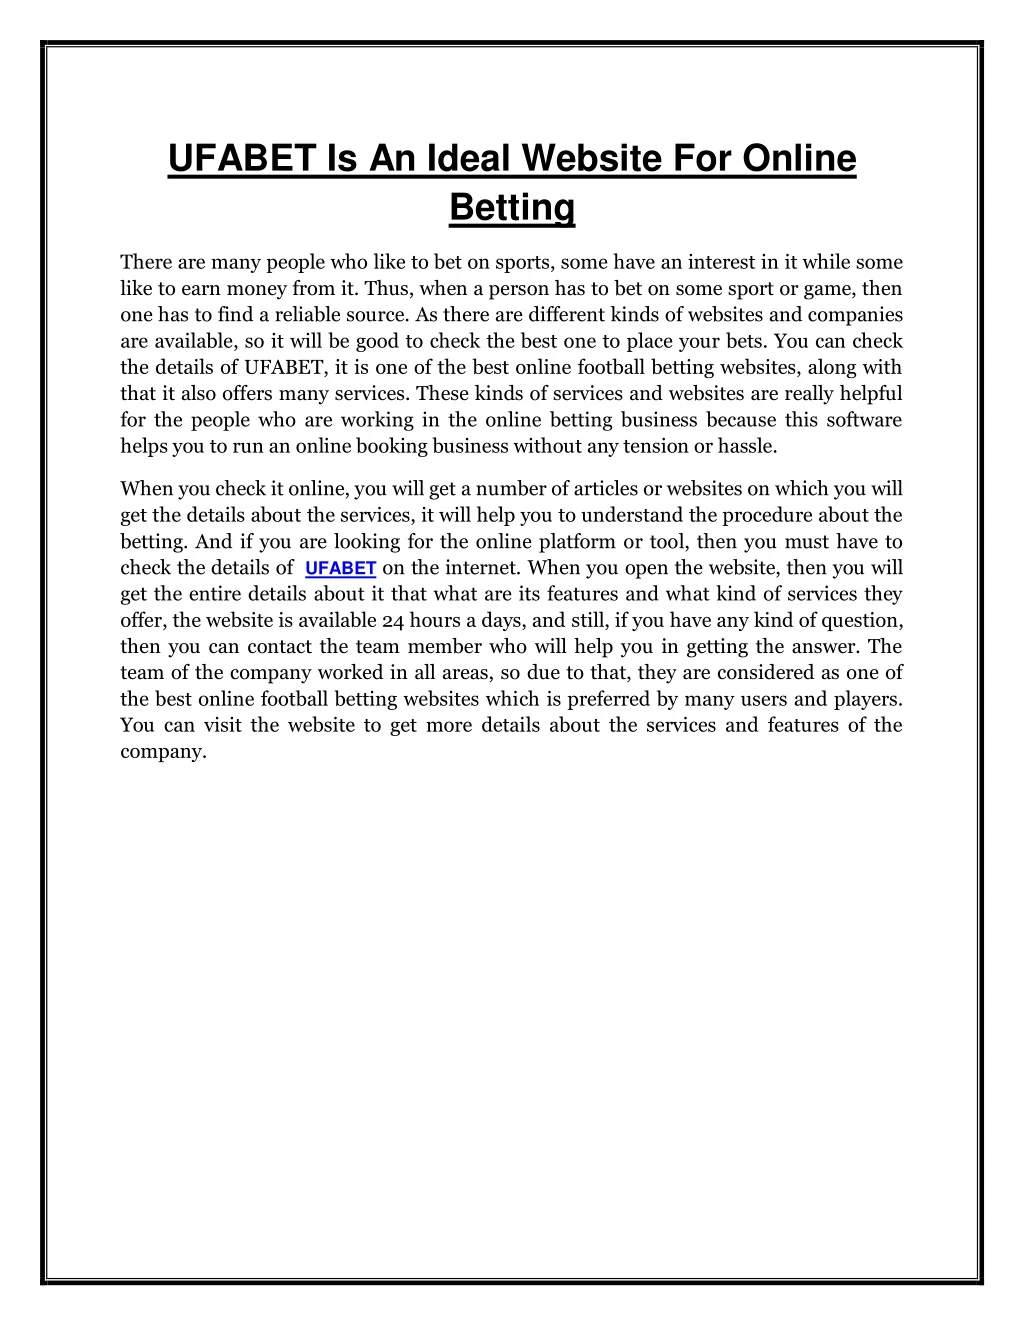 ufabet is an ideal website for online betting